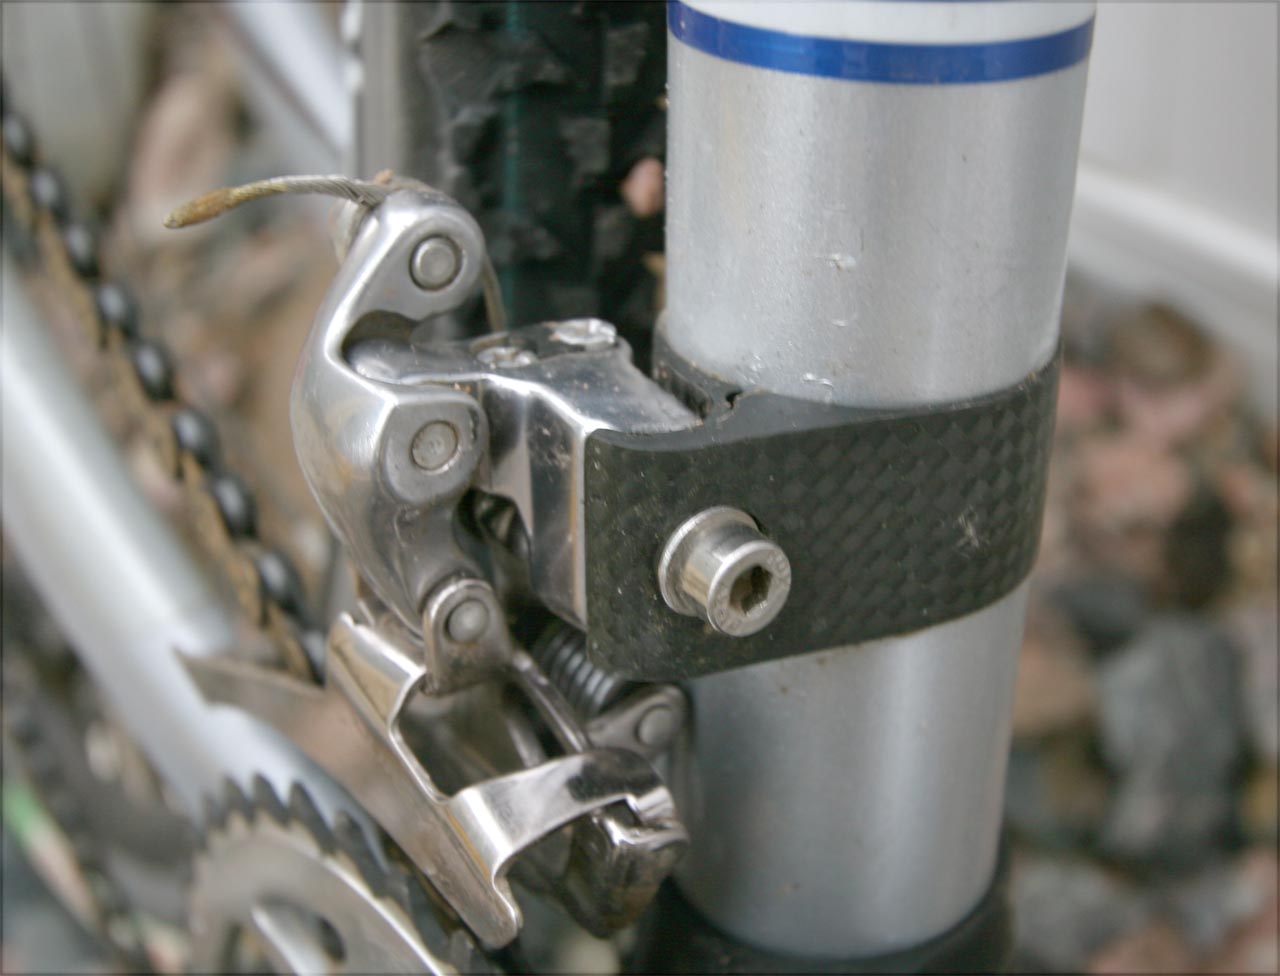 A wonky front derailleur can ruin your race. Make sure yours doesn't stand in your way!